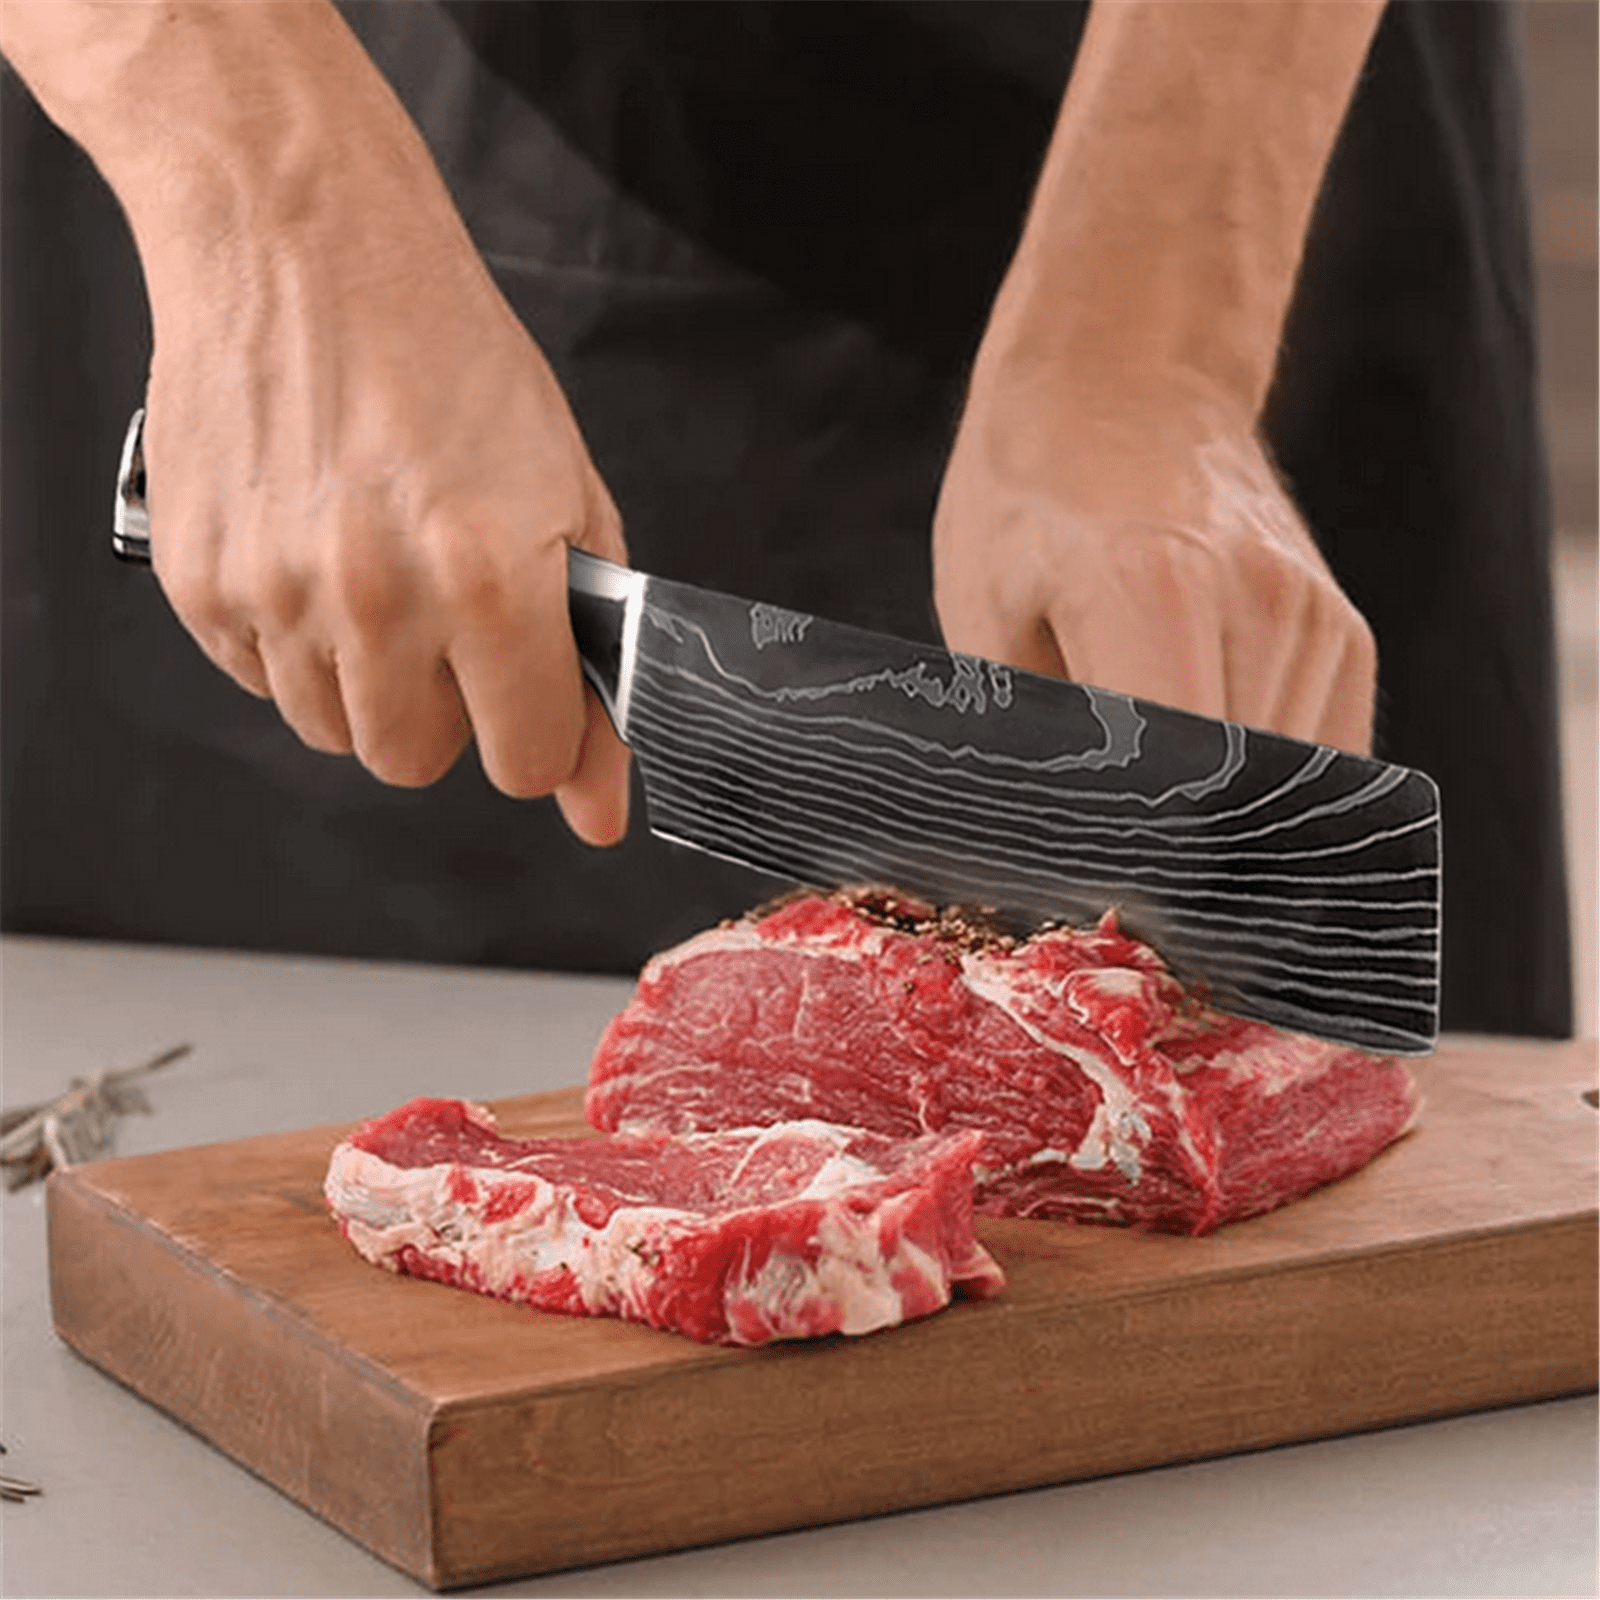 Mdhand 7 inch Kitchen Knives Laser Damascus Pattern Chef Knife Sharp Cleaver Slicing Utility Knives Tool